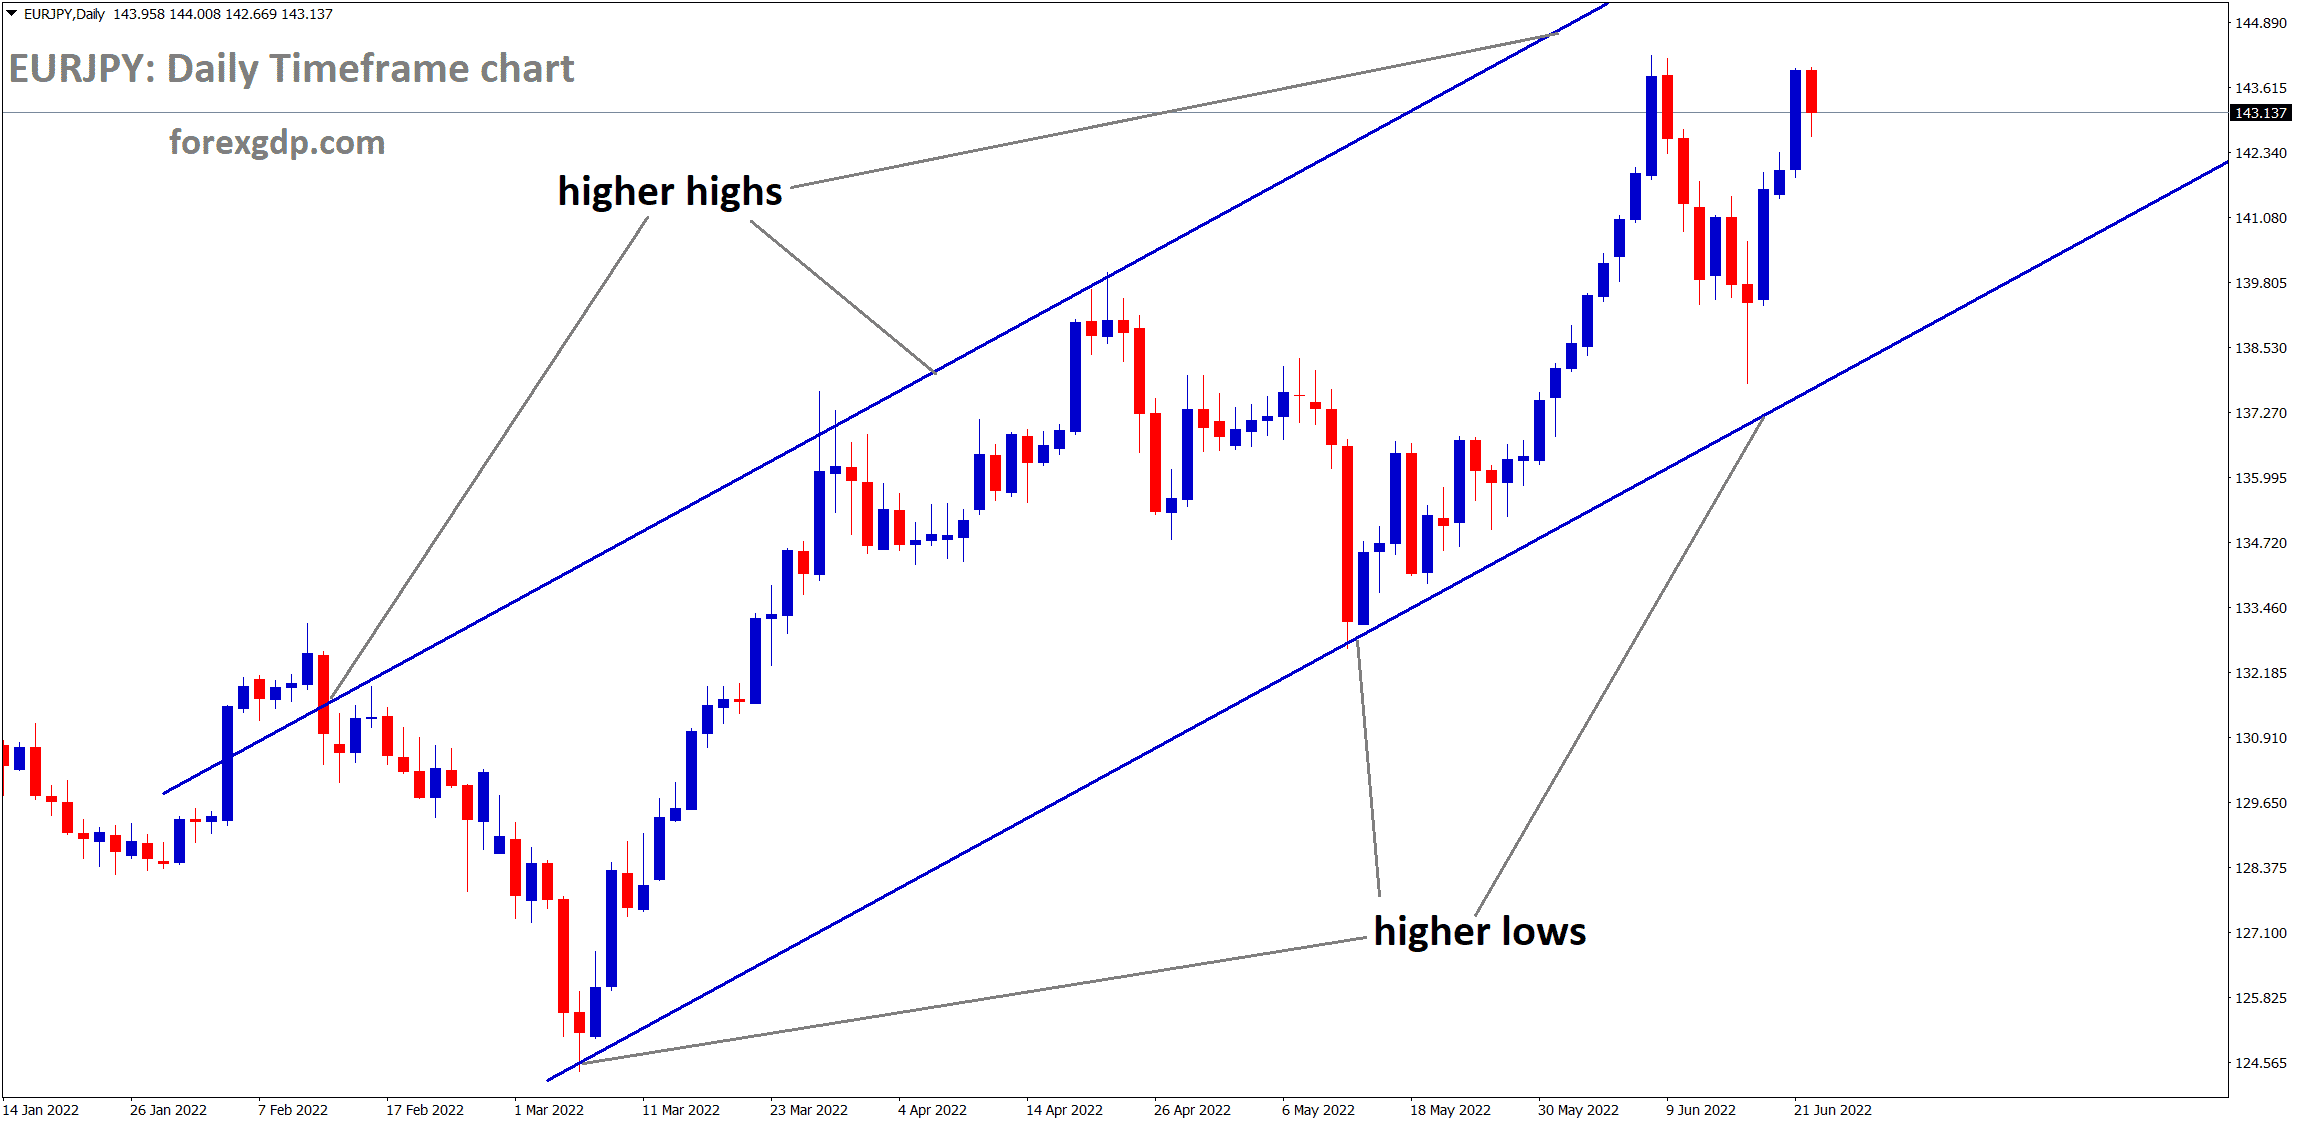 EURJPY is moving in ascending channel and the market is has reached the higher high area of the channel.